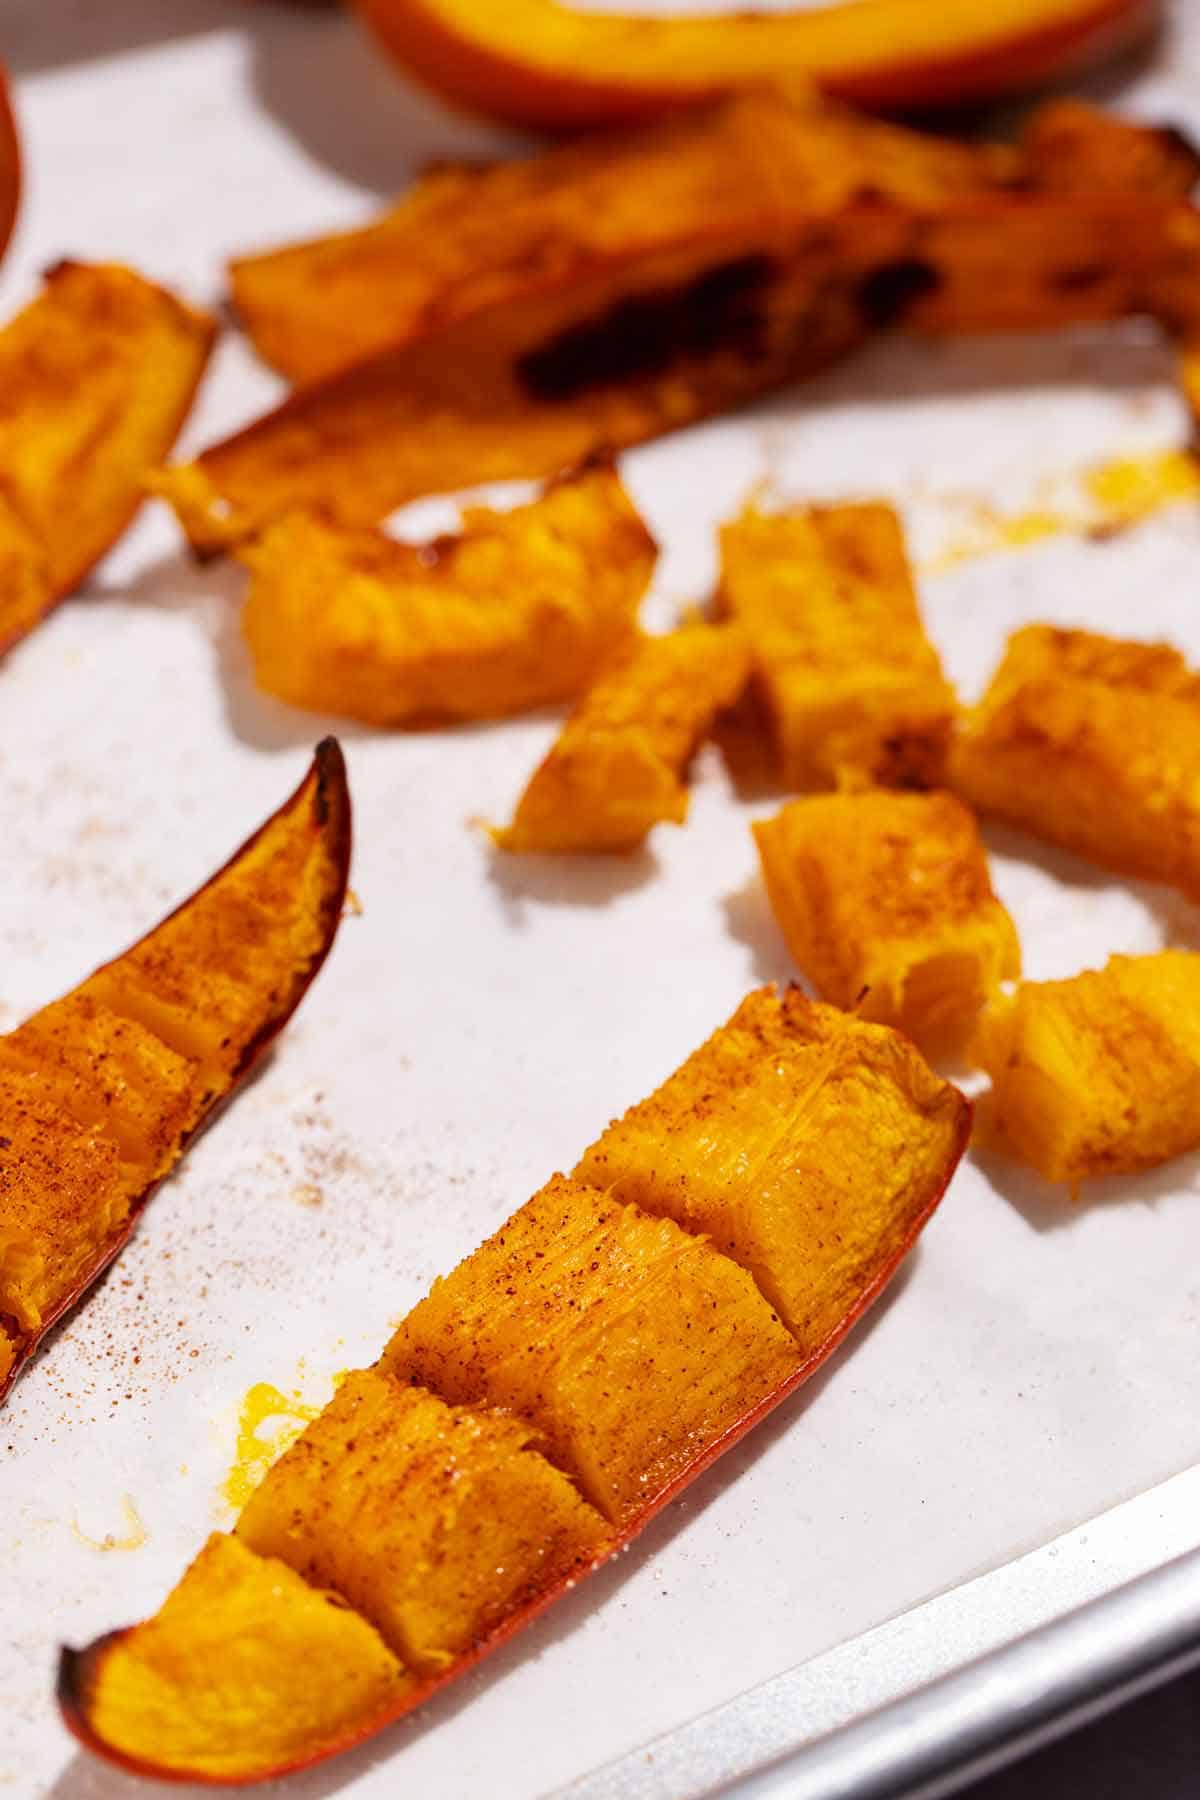 Roasted pumpkin wedge with peel cut into segments. The cut does not go through the peel, only the pumpkin flesh.